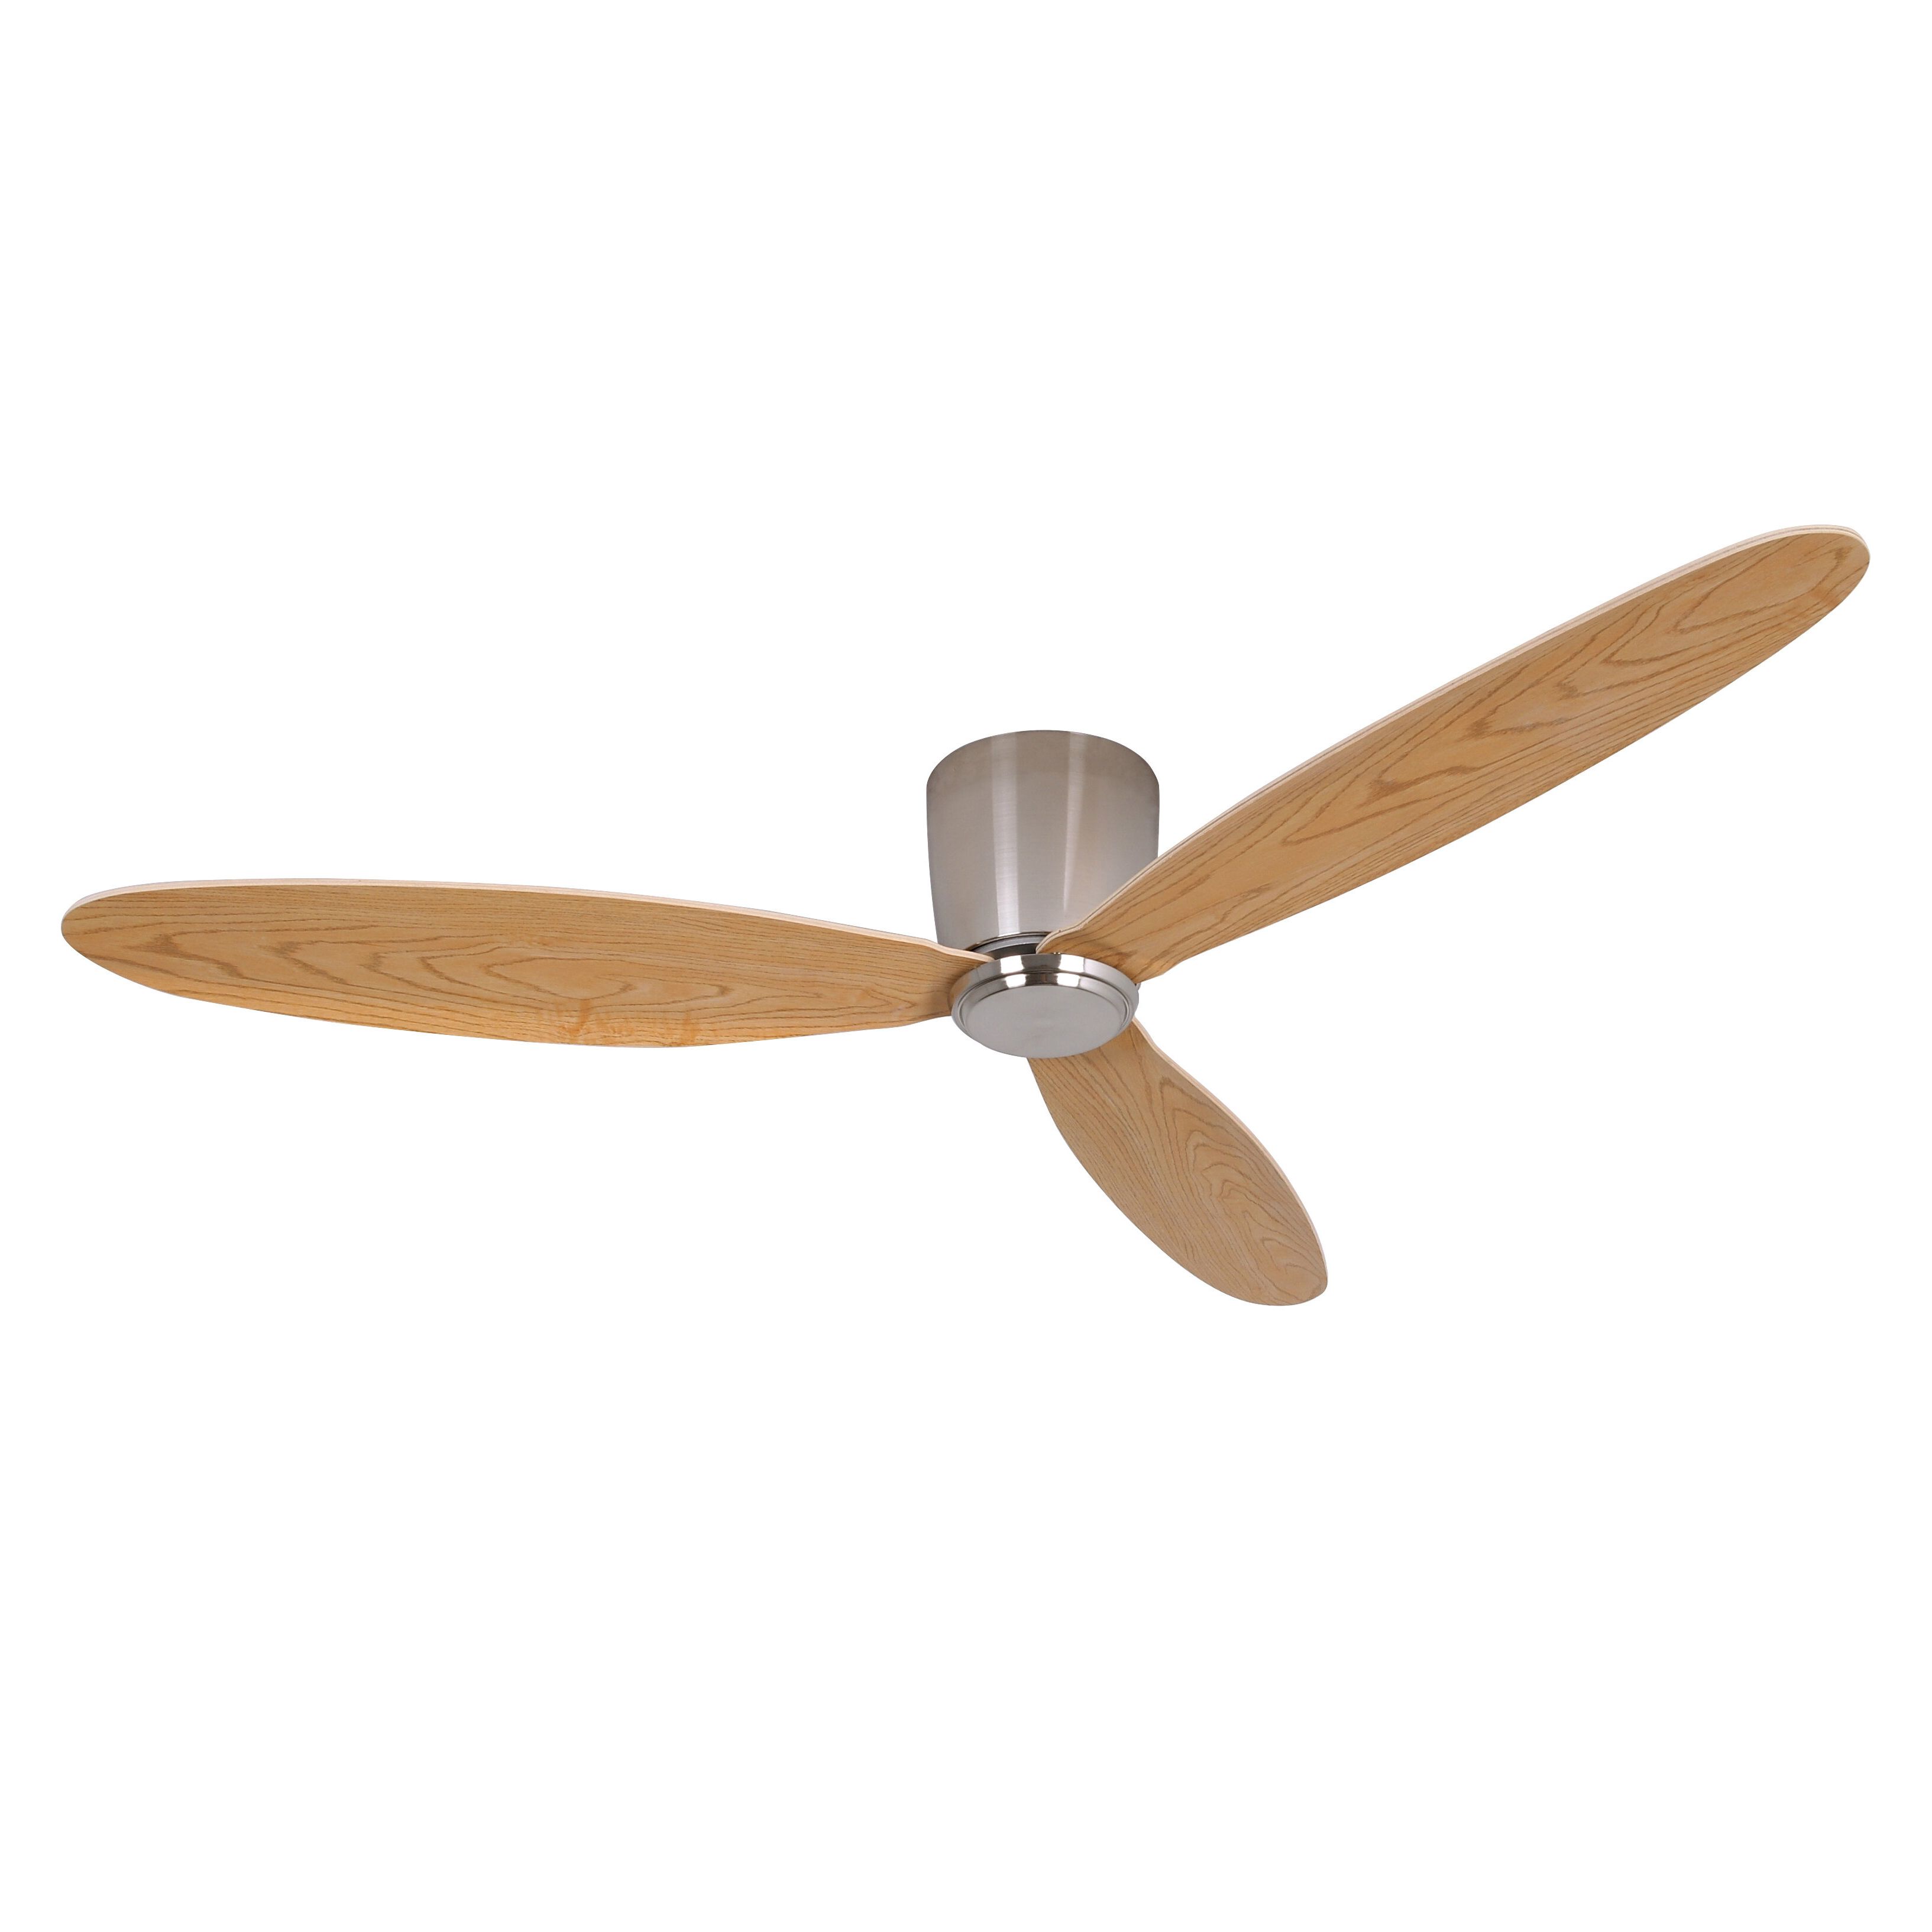 Newest 52" Anadarko 3 Blade Ceiling Fan With Remote For Tyree 3 Blade Ceiling Fans (View 11 of 20)